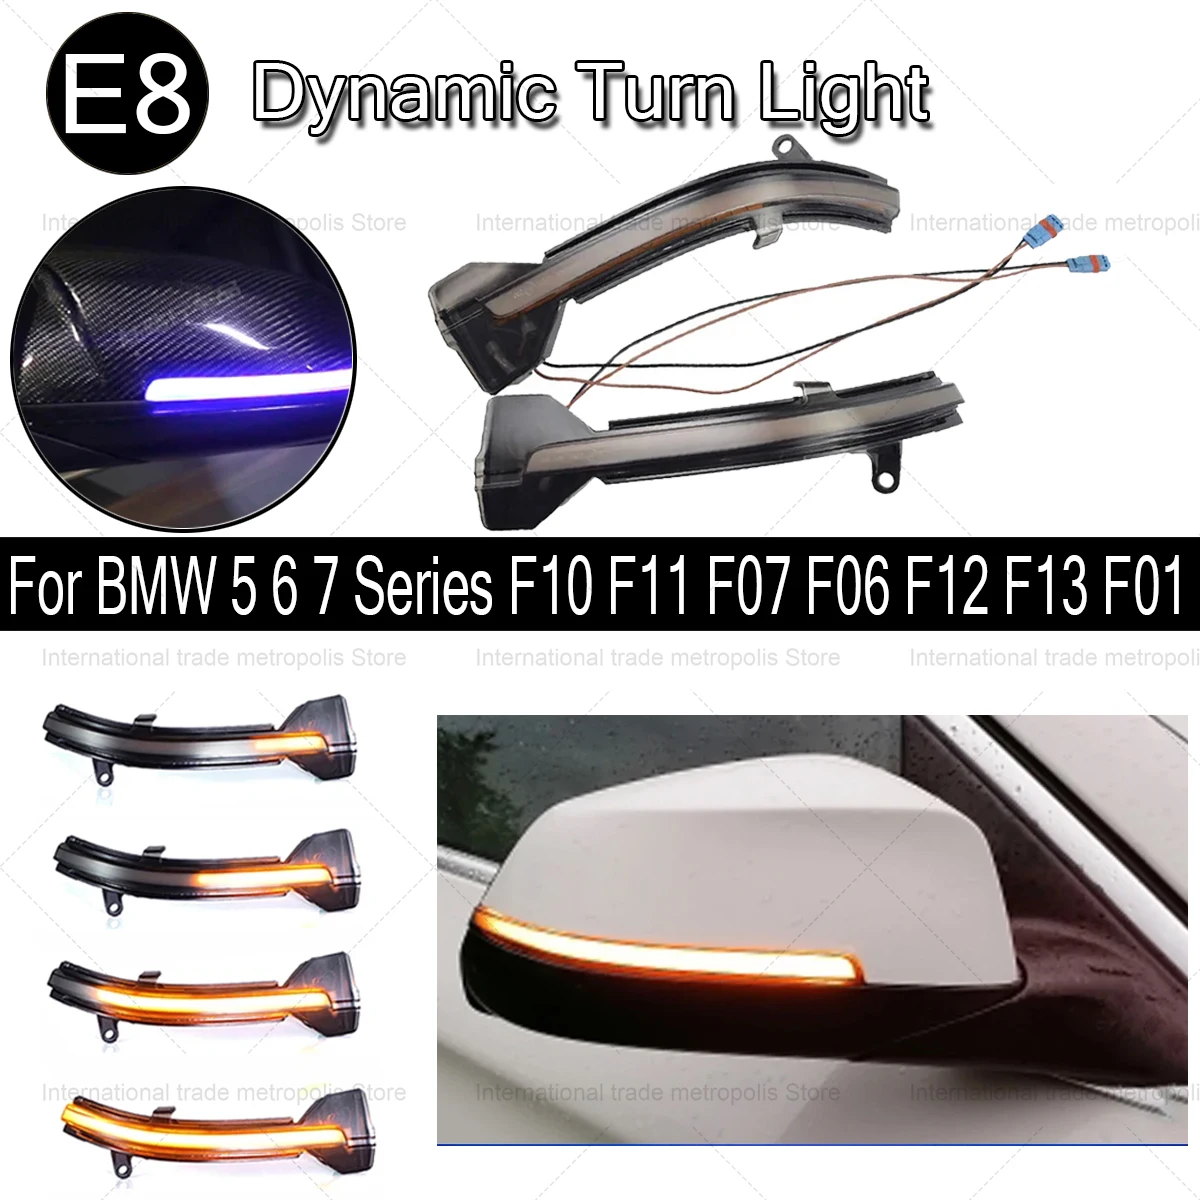 

For BMW 5 6 7 Series F10 F11 F07 F06 F12 F13 F01 Dynamic Turn Signal LED Rearview Mirror Indicator Blinker Sequential Light